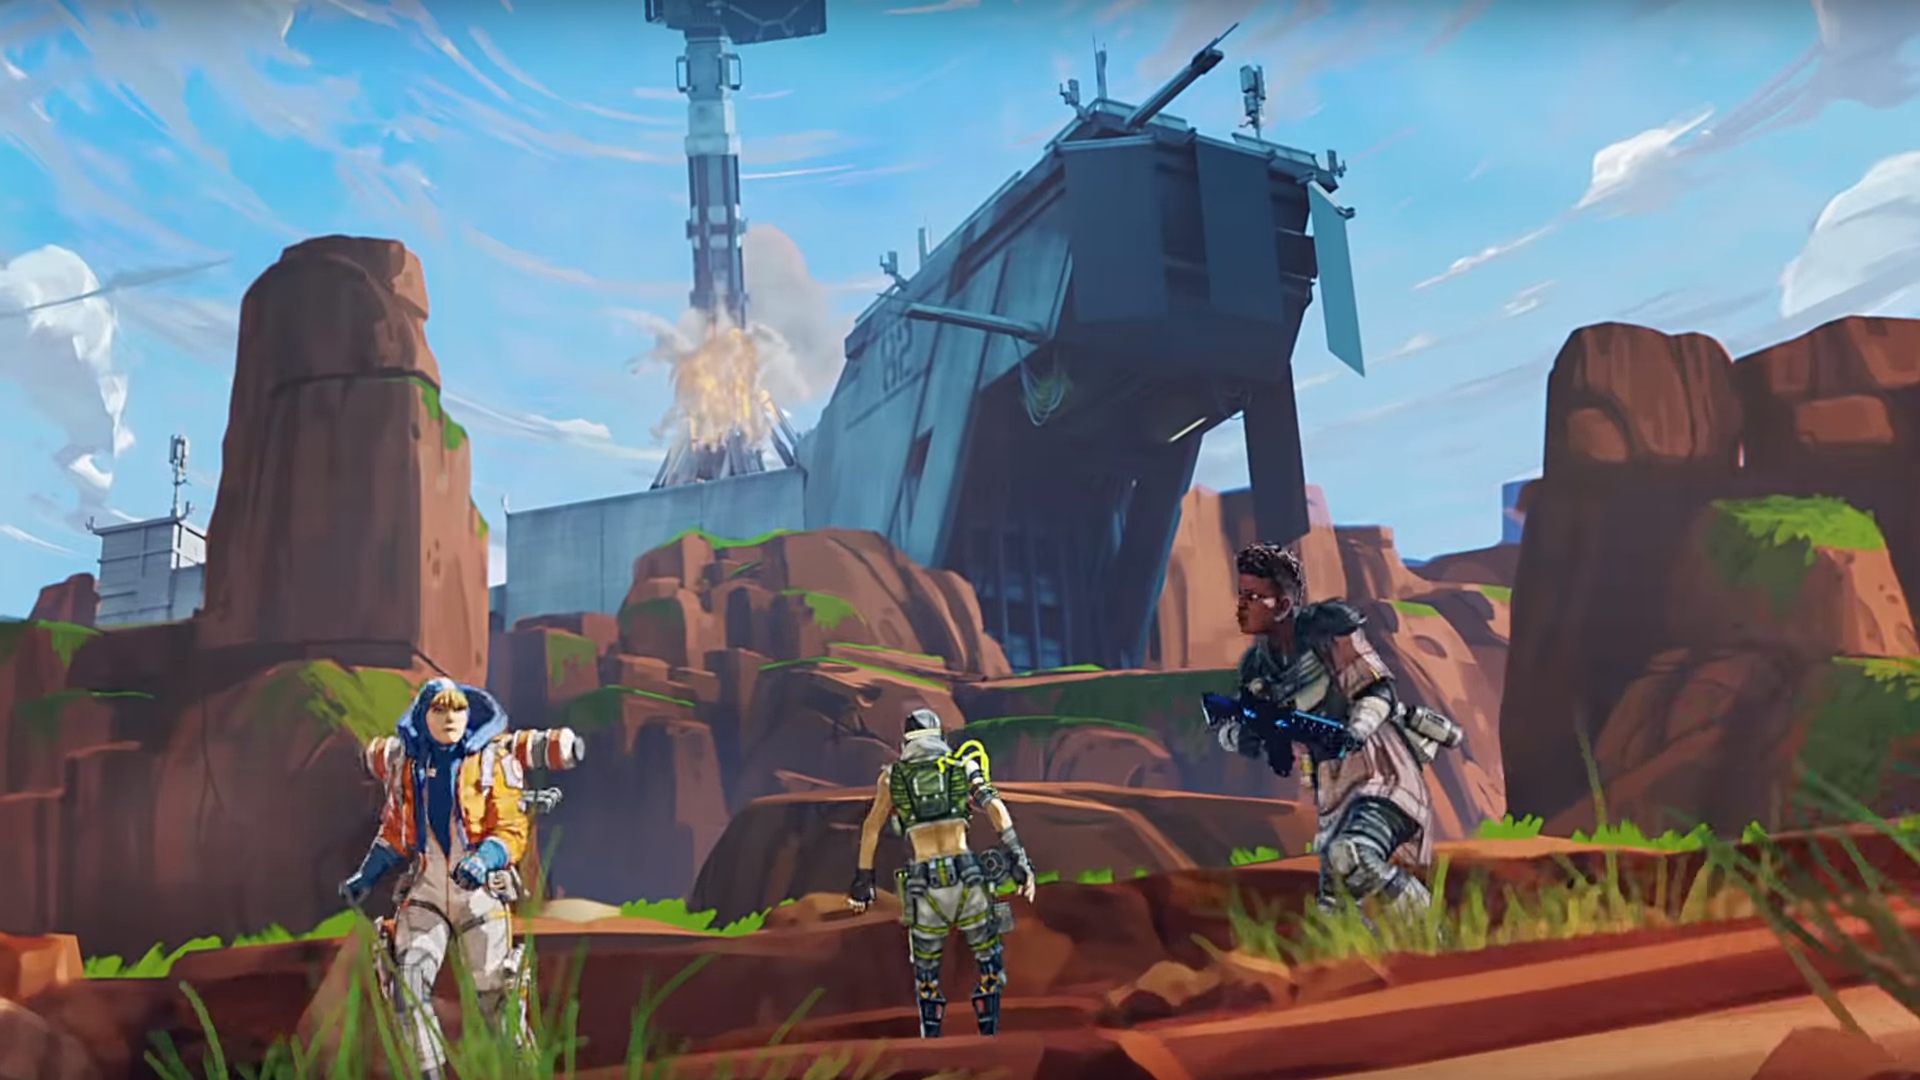 Apex Legends might be teasing Horizon, a new character - Polygon